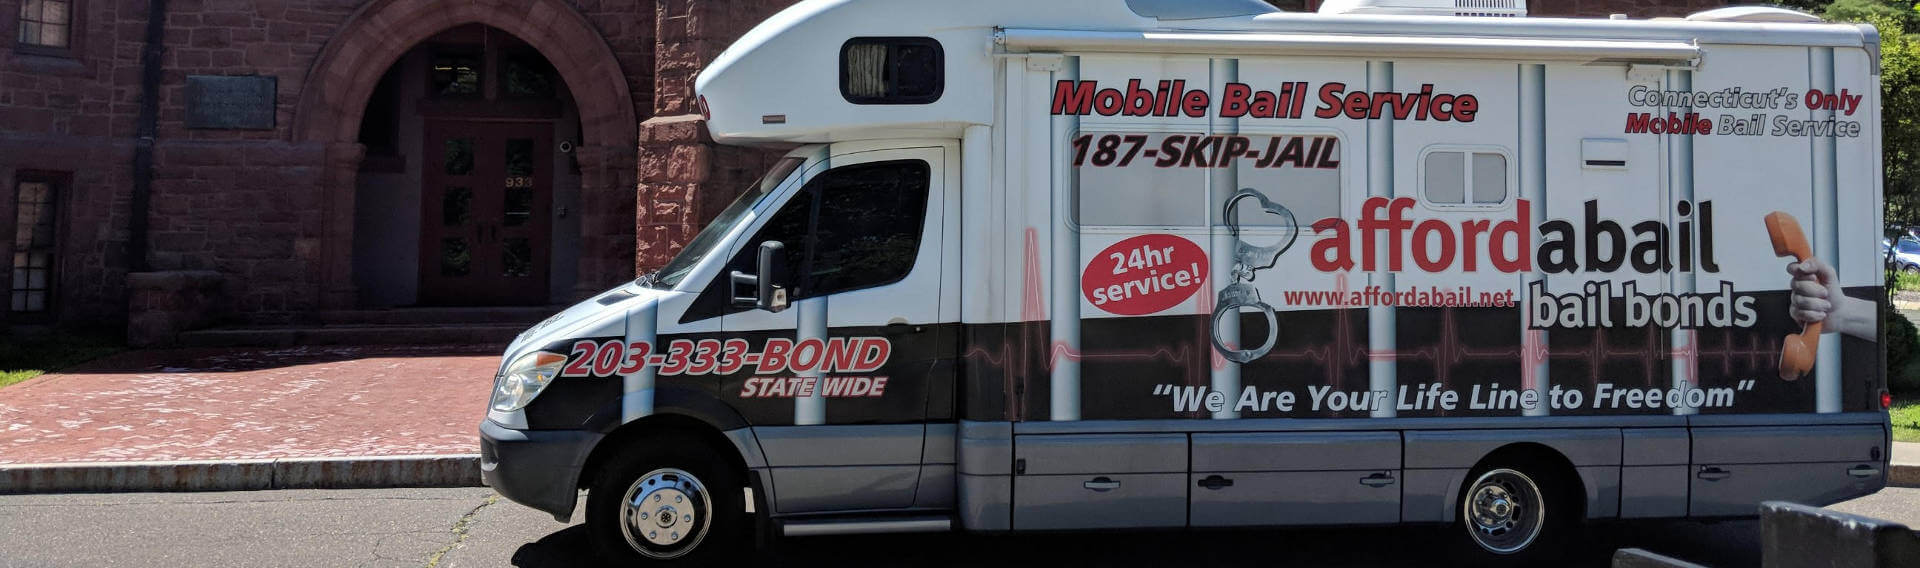 Mobile bail bonds service in Derby CT